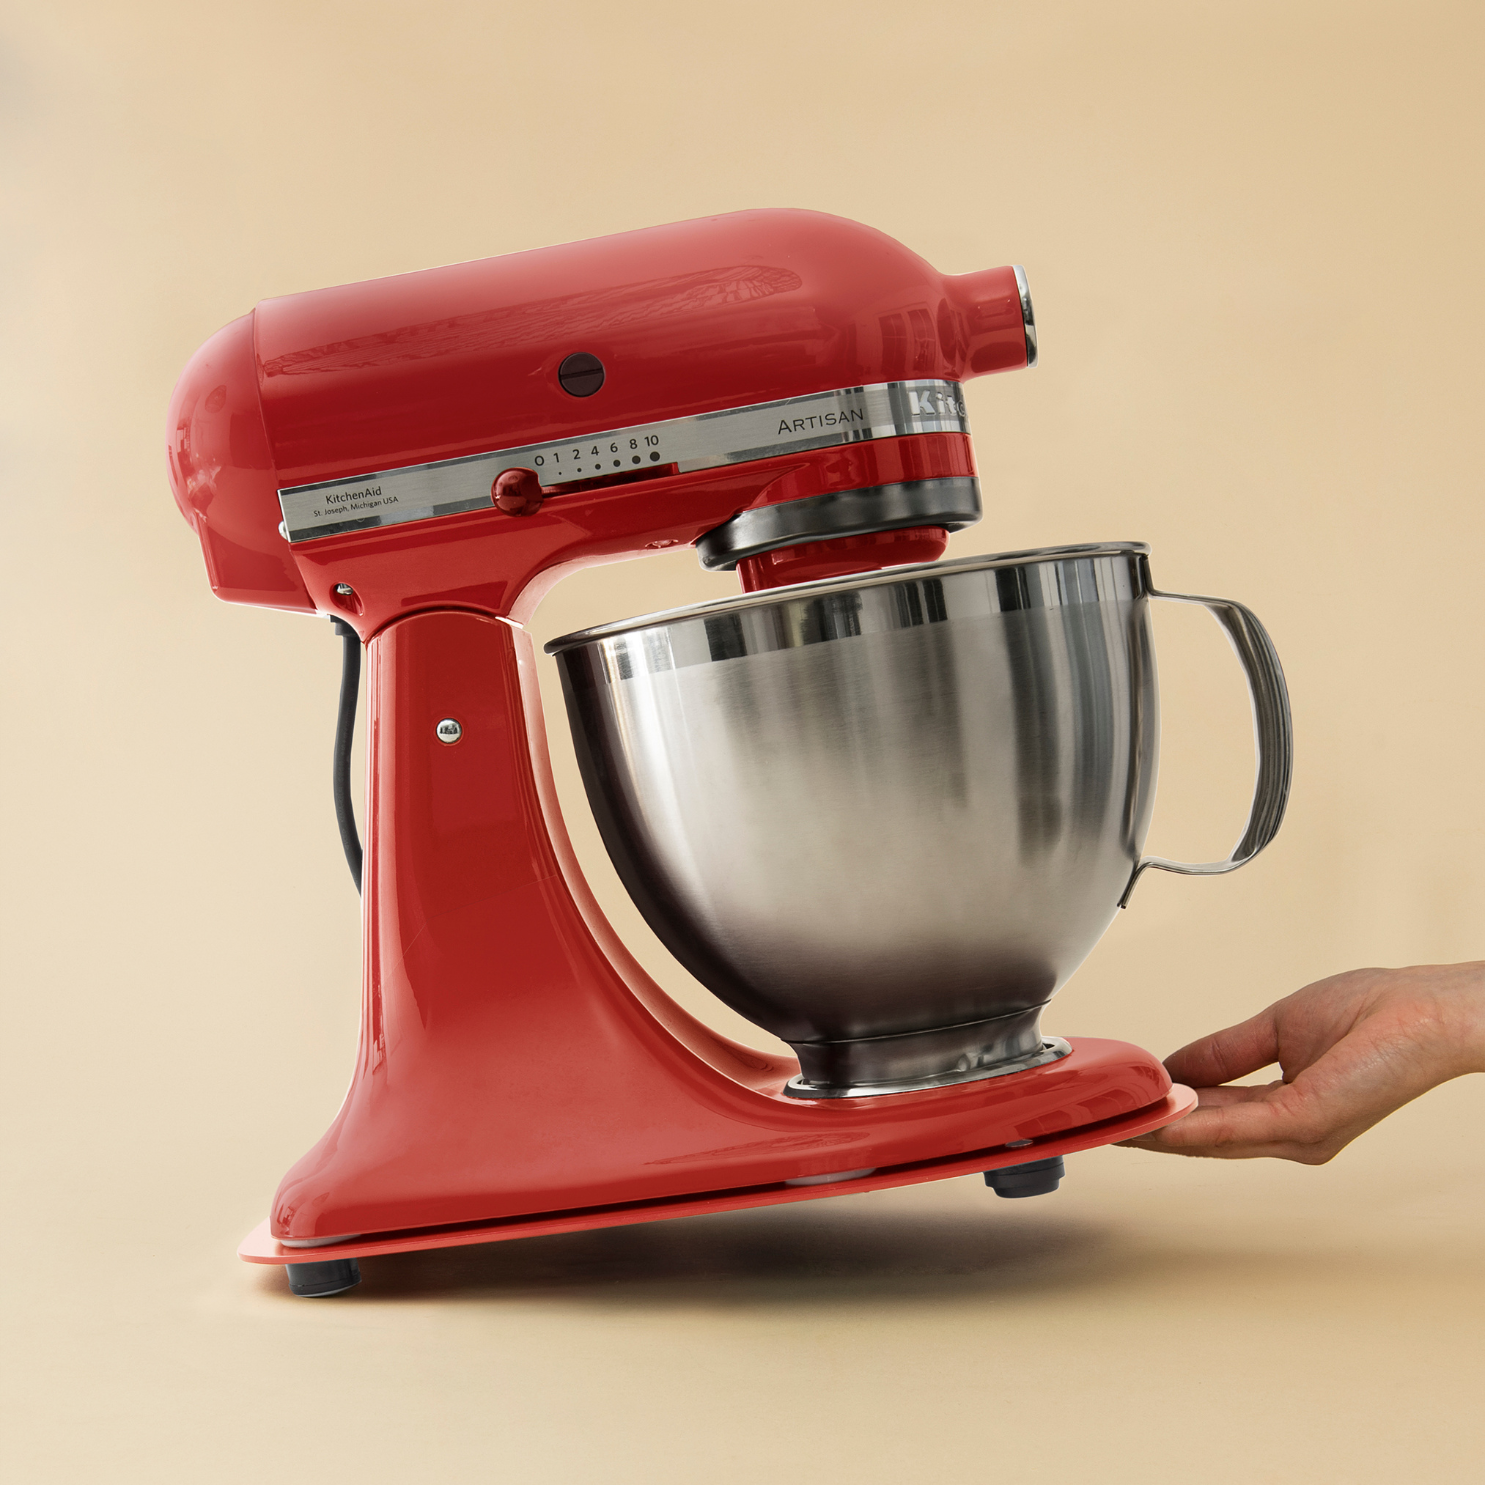 B-stock: sliding board for the KitchenAid® food processor in red